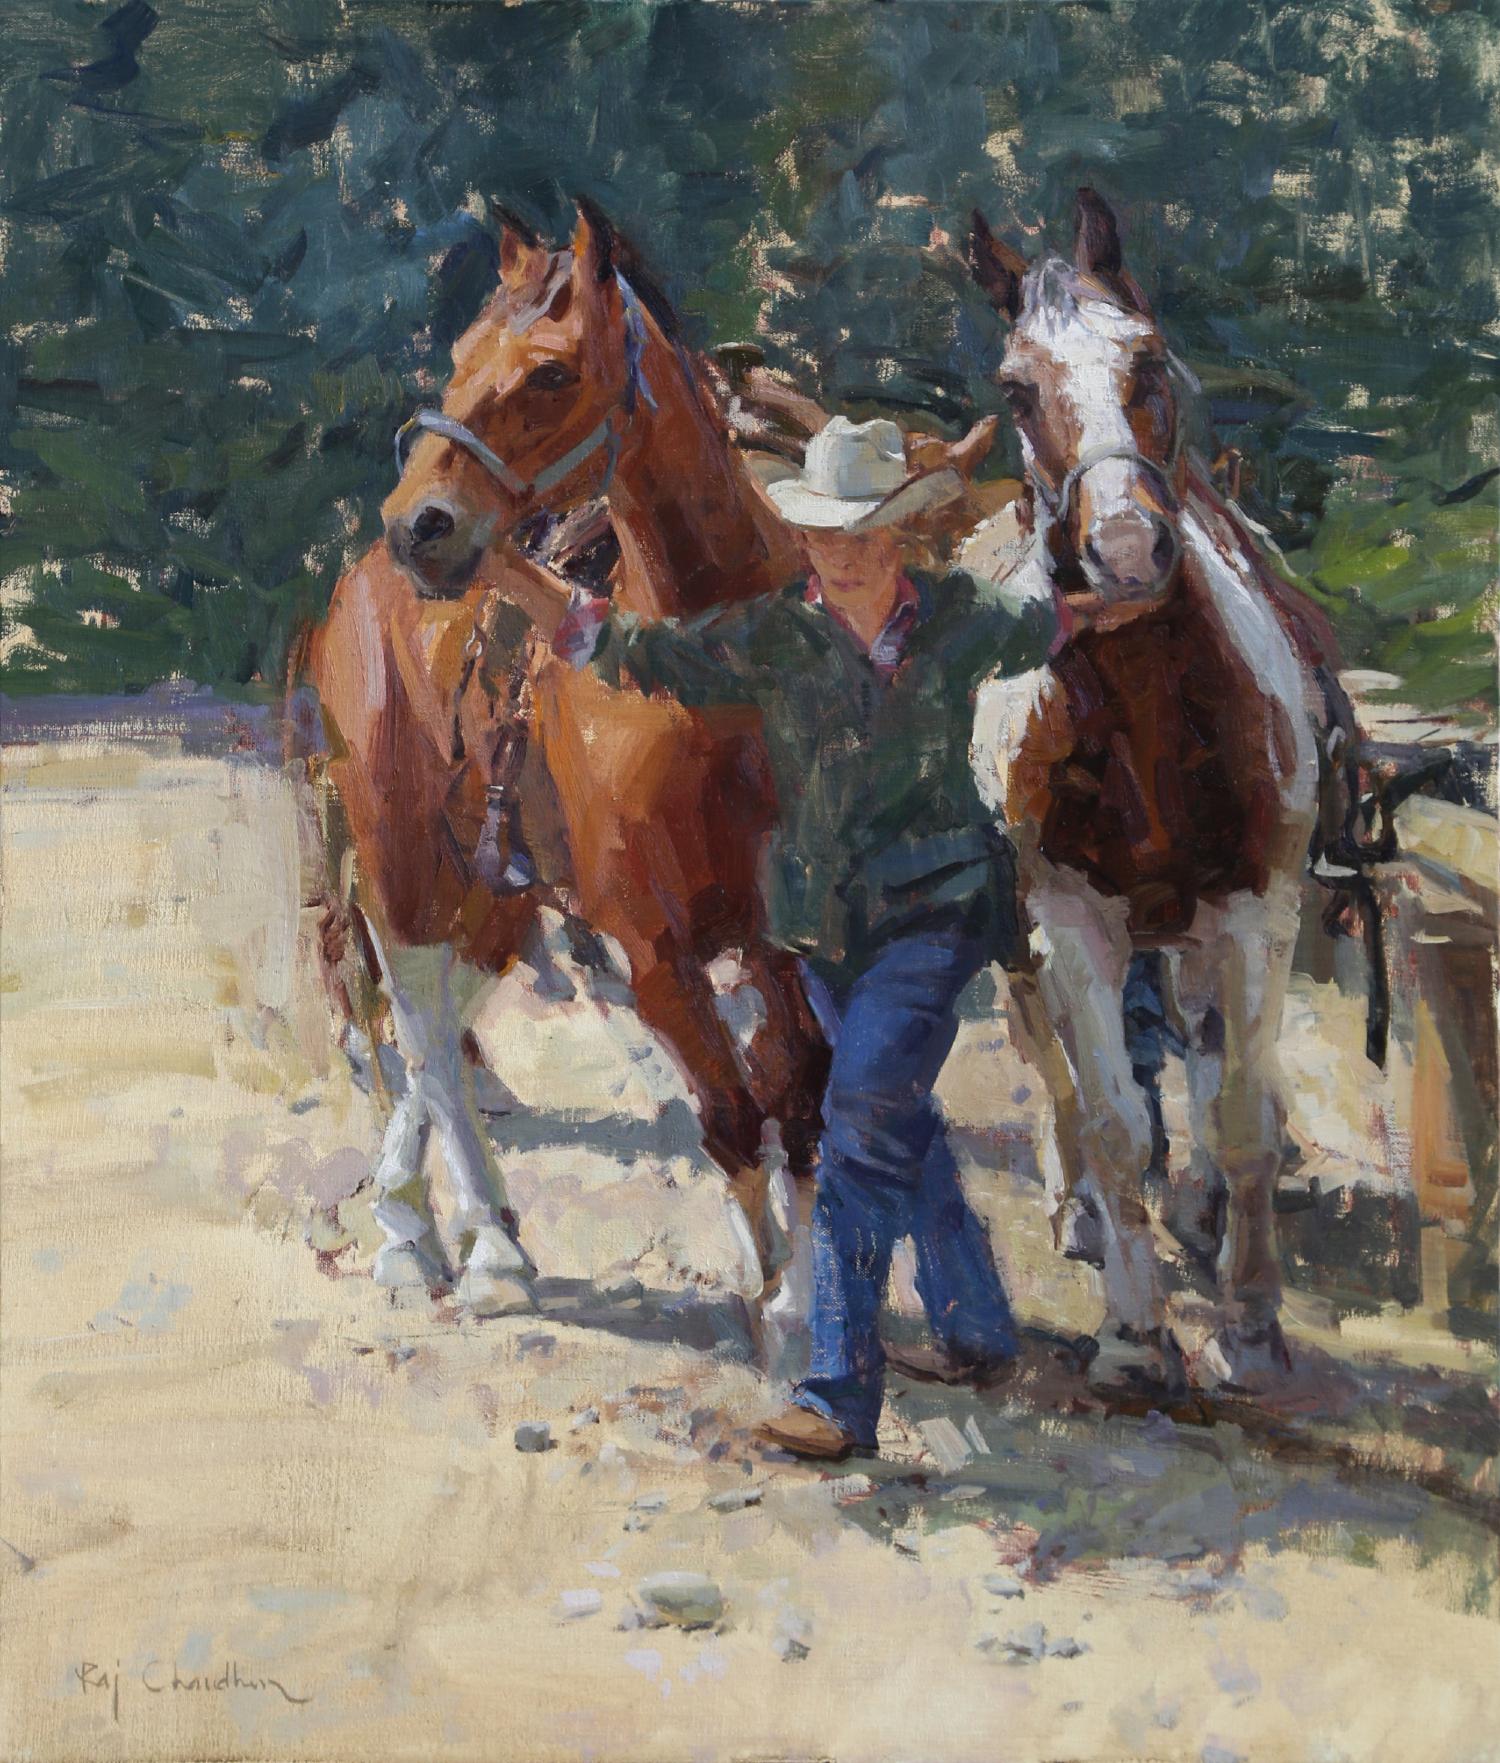 Lead Wrangler, Oil on Linen, American Impressionistic Style, Western, Southwest - Black Animal Painting by Raj Chaudhuri